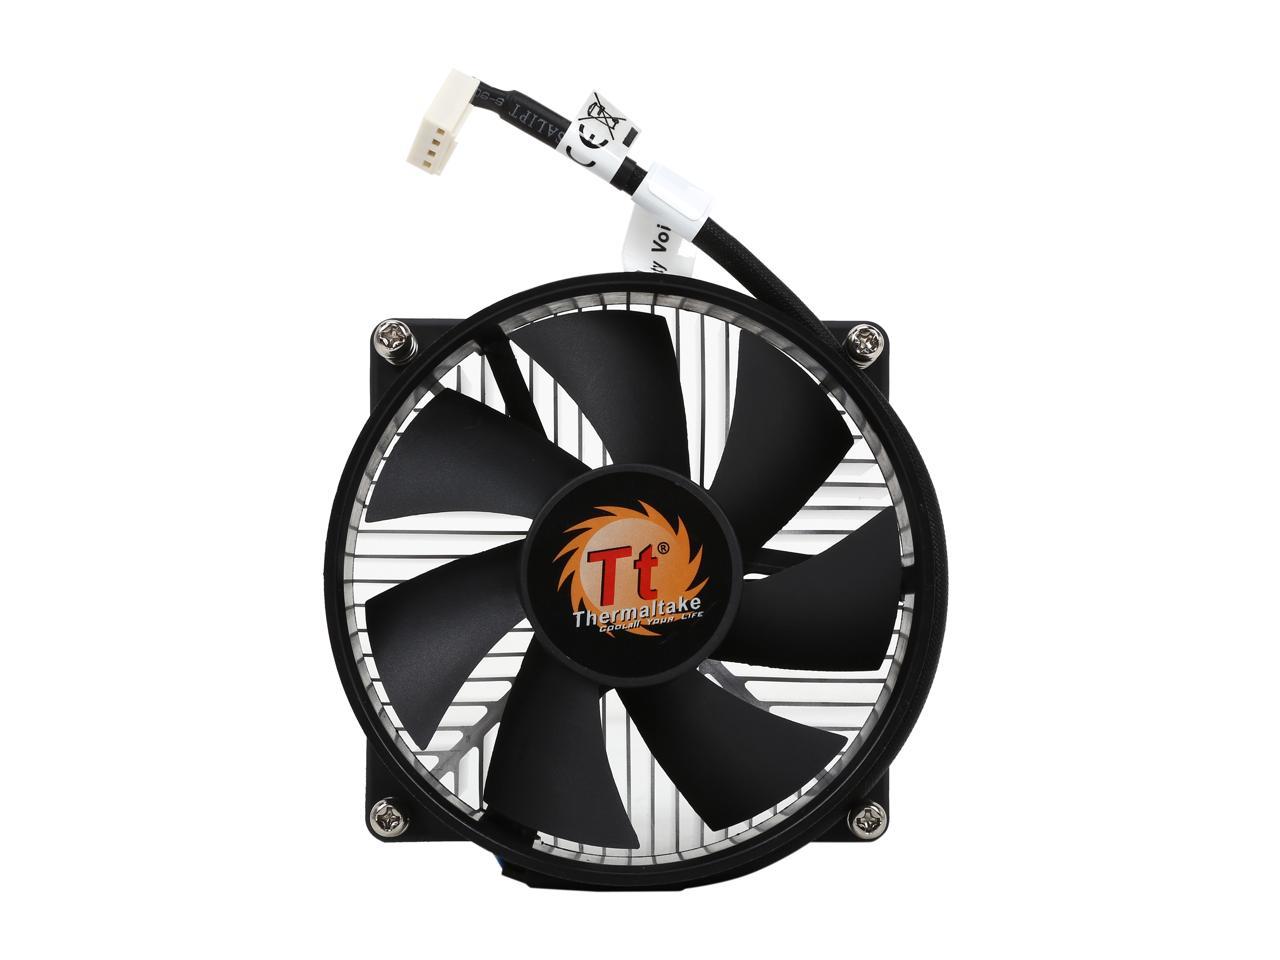 Thermaltake Gravity i2 95W 7-Bladed 92mm 4-Pins PWM Aluminum Extrusion CPU Cooling Fan for Intel Core i7/i5/i3 CLP0556-B